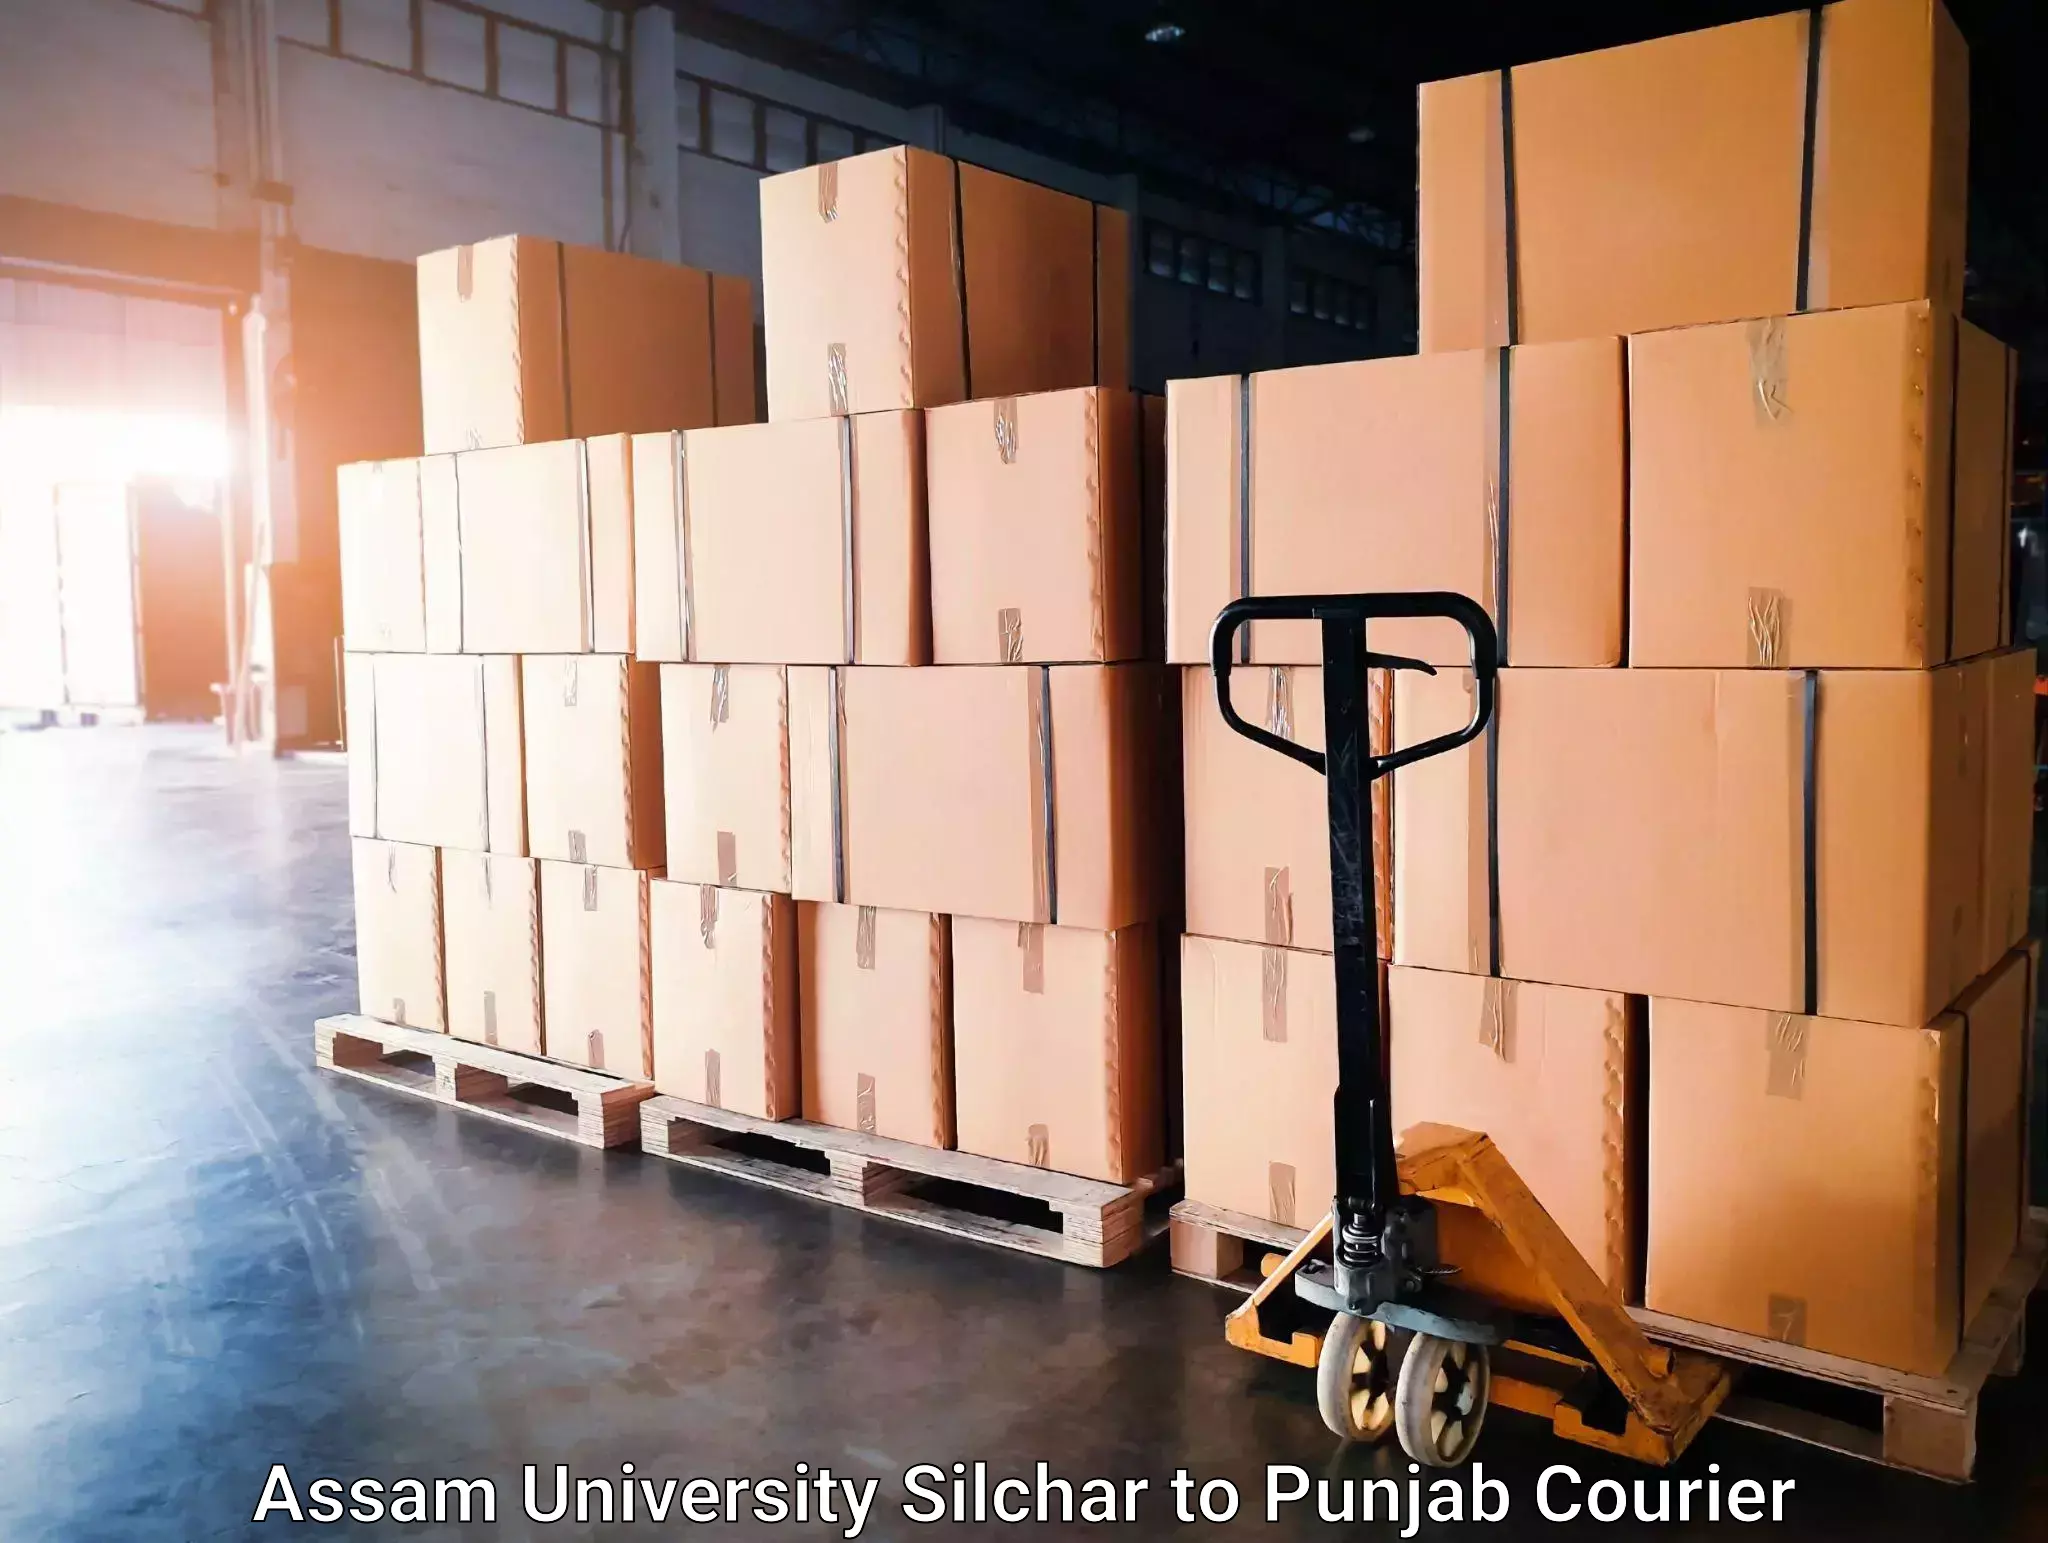 Same-day delivery solutions Assam University Silchar to Mohali